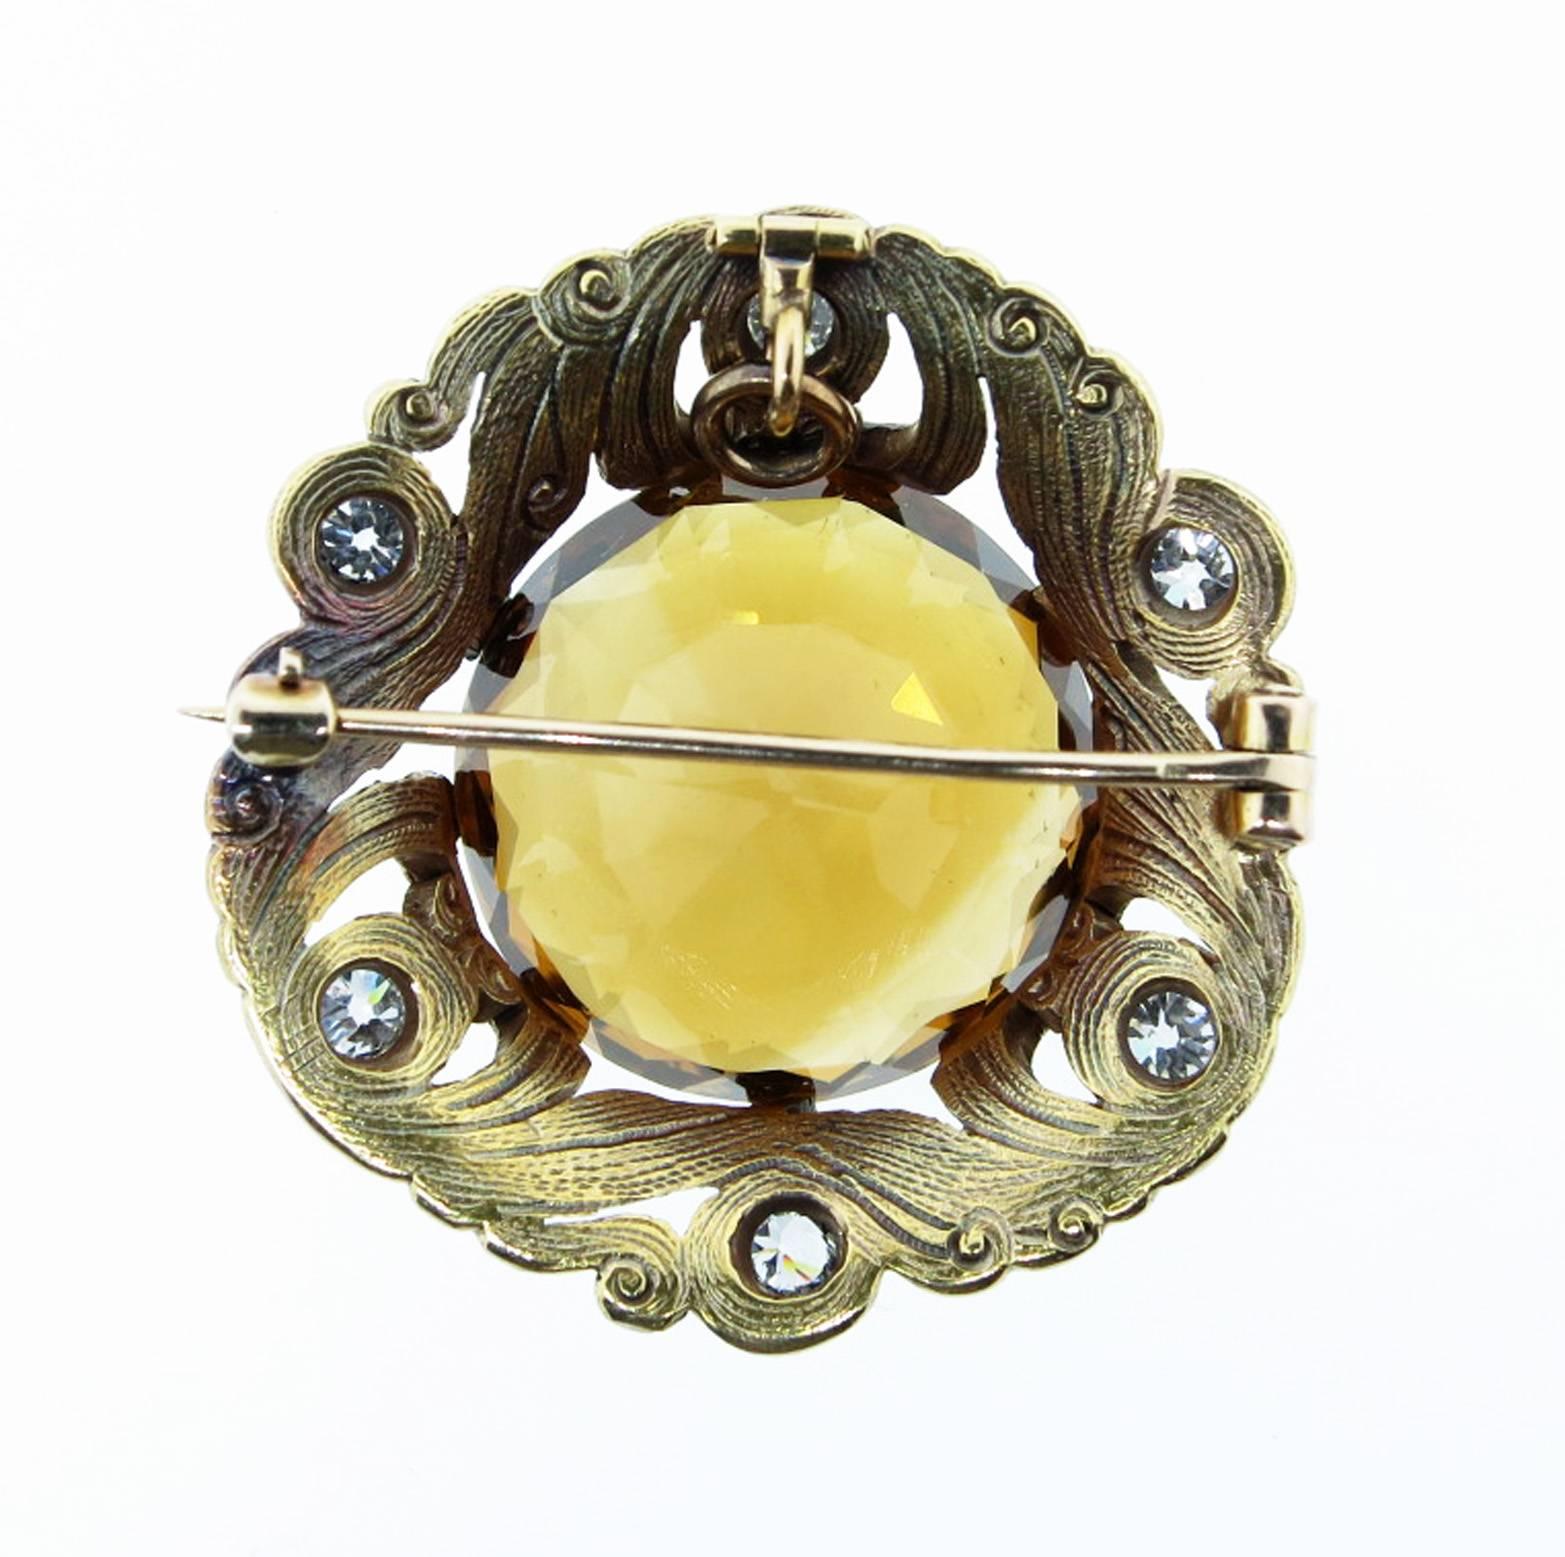 Handmade and hand engraved front and back 14kt yellow gold  citrine and diamond brooch pendant. The center is prong set  with a faceted natural golden citrine weighing approx  28cts. The brooch measures approx 1 1/2 inches and the open work frame is